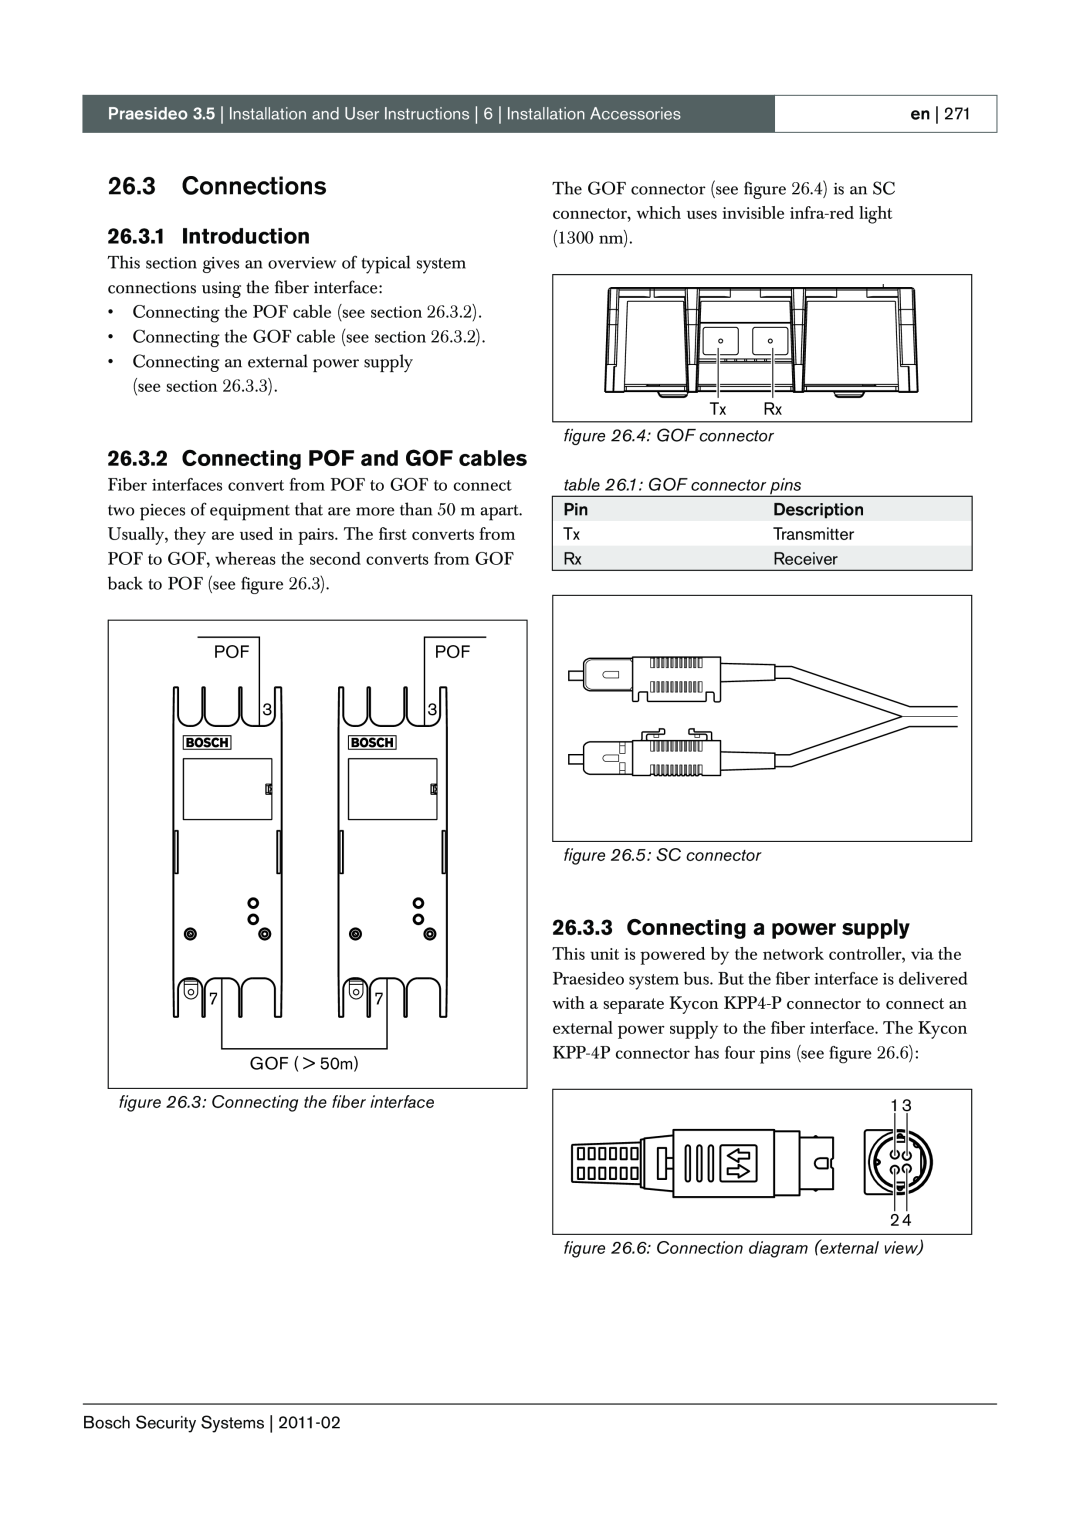 Bosch Appliances 3.5 manual 26.3Connections, Introduction, Connecting POF and GOF cables, Connecting a power supply 